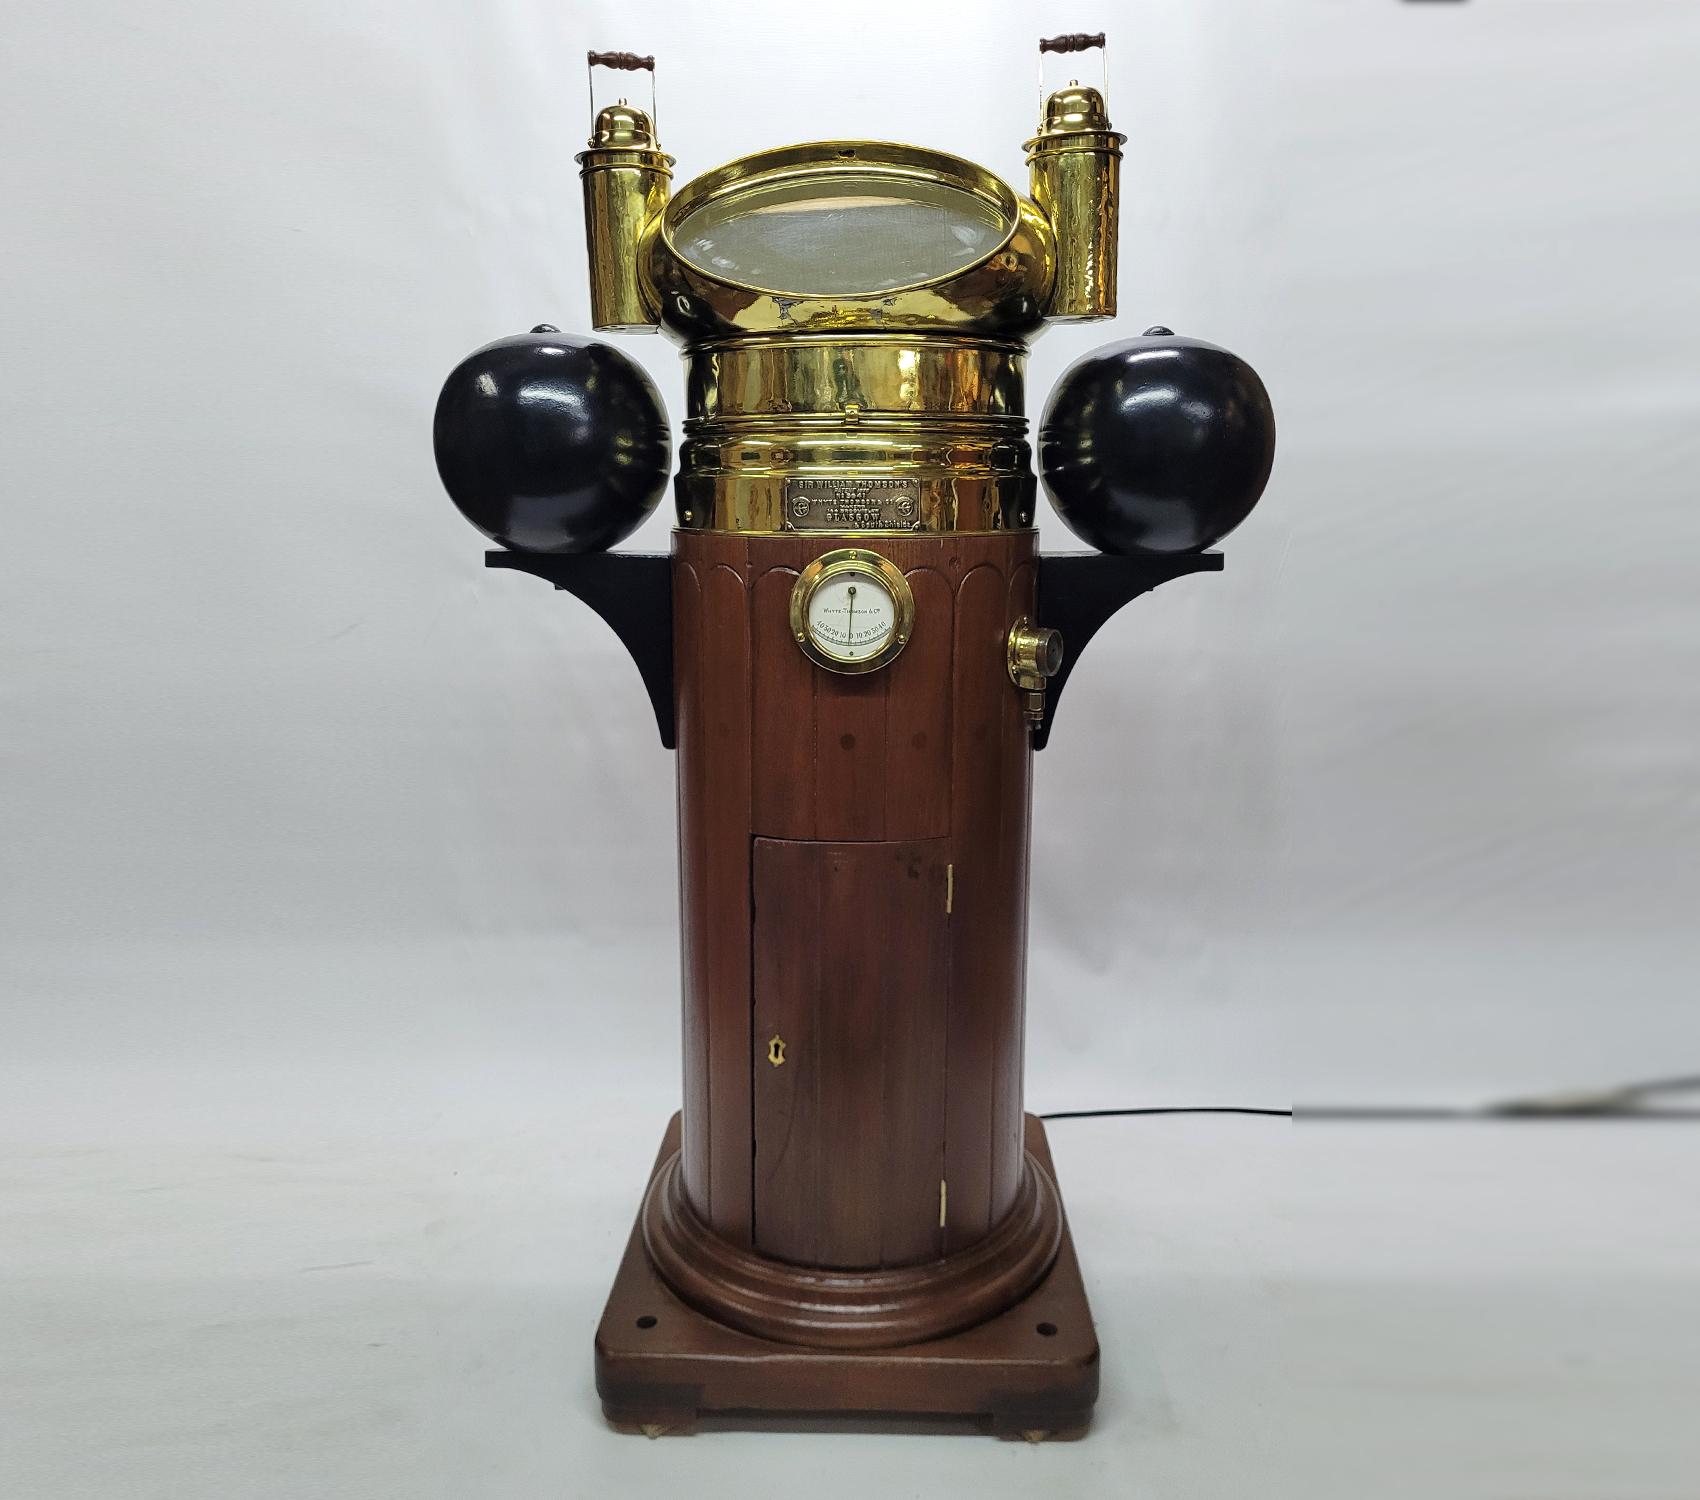 Absolutely rare and beautiful ships binnacle by Sir William Thomson of Glasgow. With a substantial varnished base. Polished and lacquered mushroom style hood and compass cowl. Very rare dry card compass on hanging gimbal, all polished to perfection.